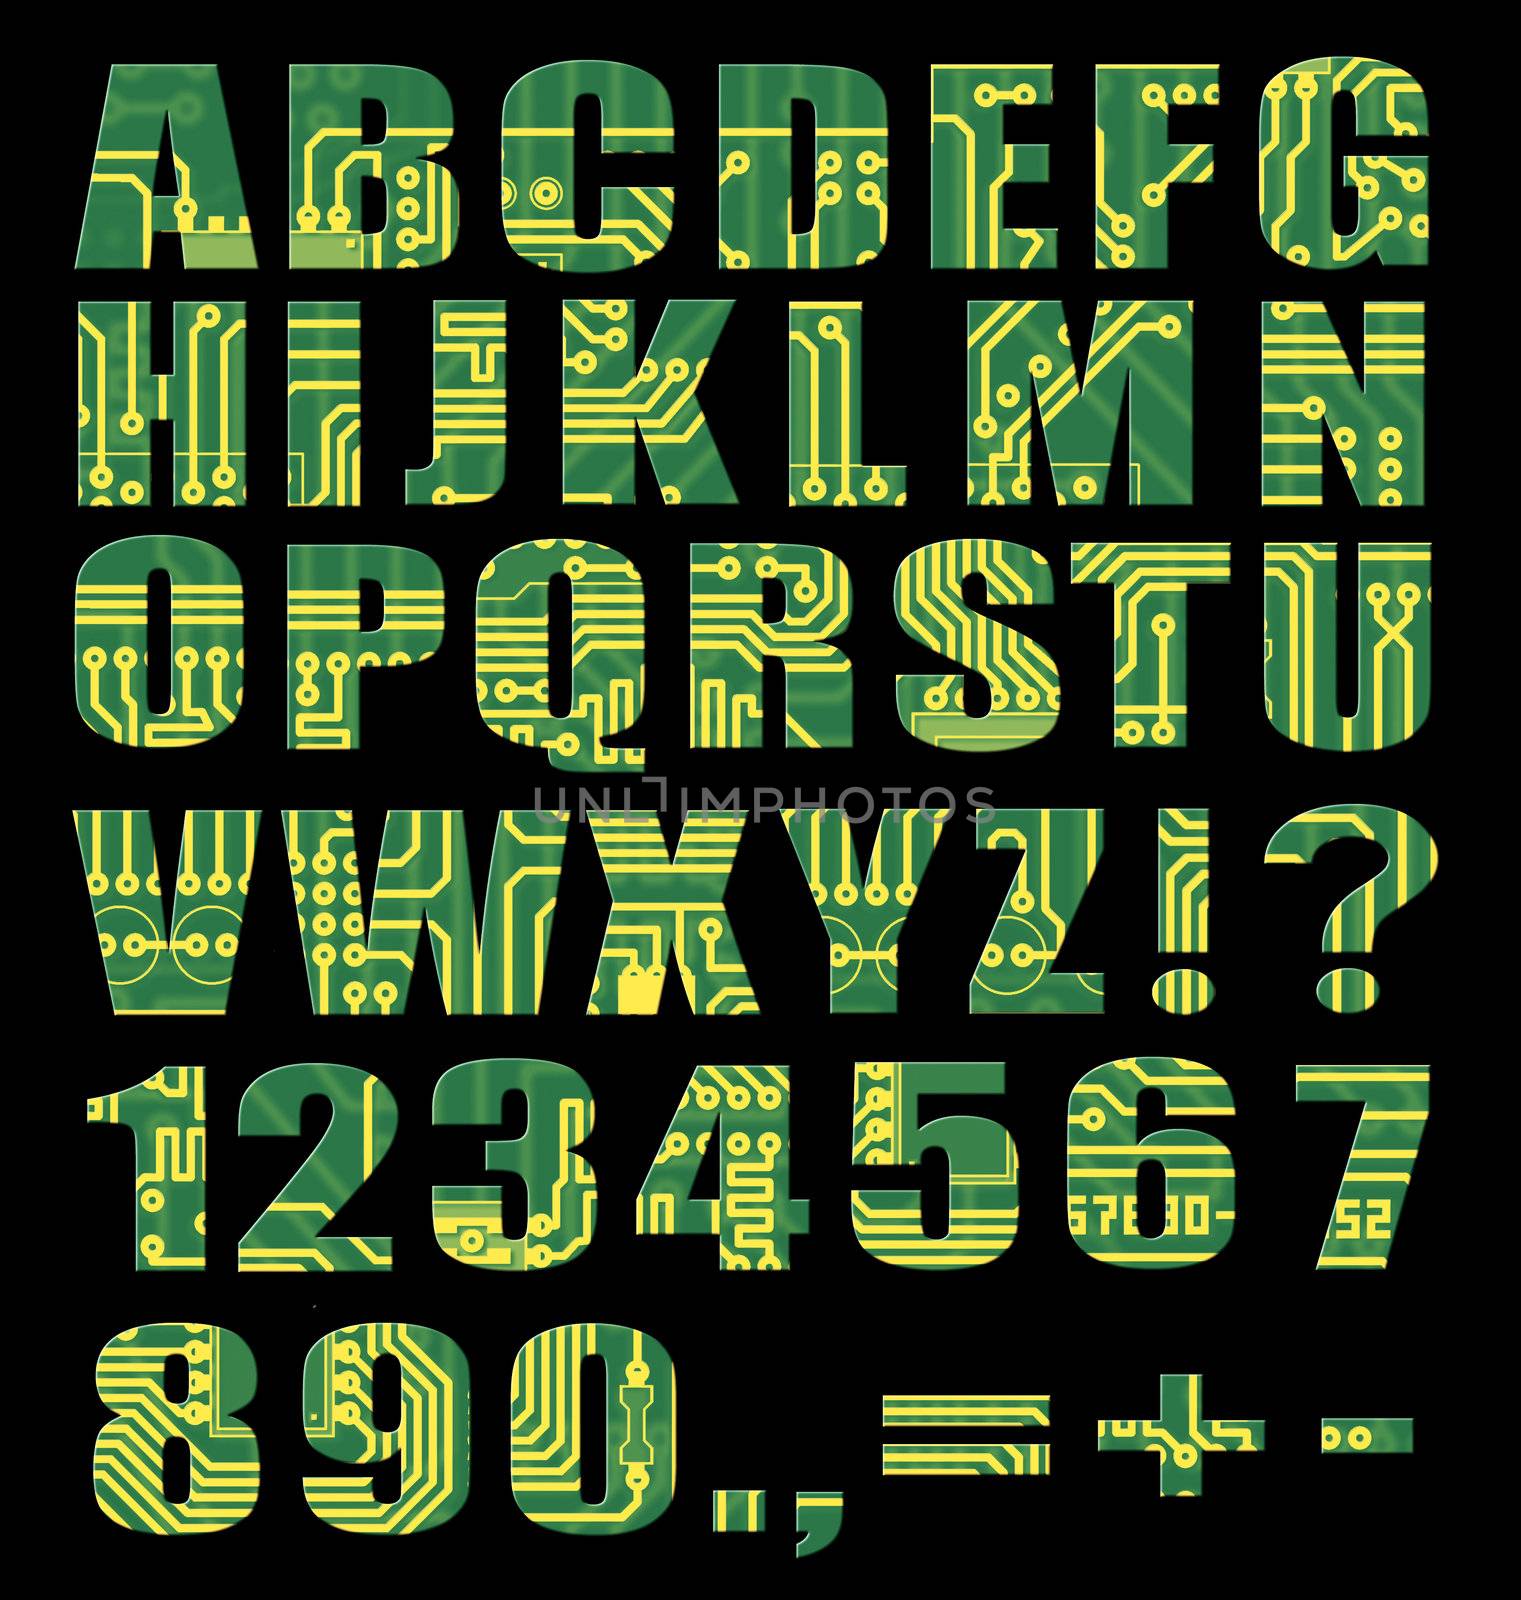 Electronic alphabet with letters and digits from circuit board on black background